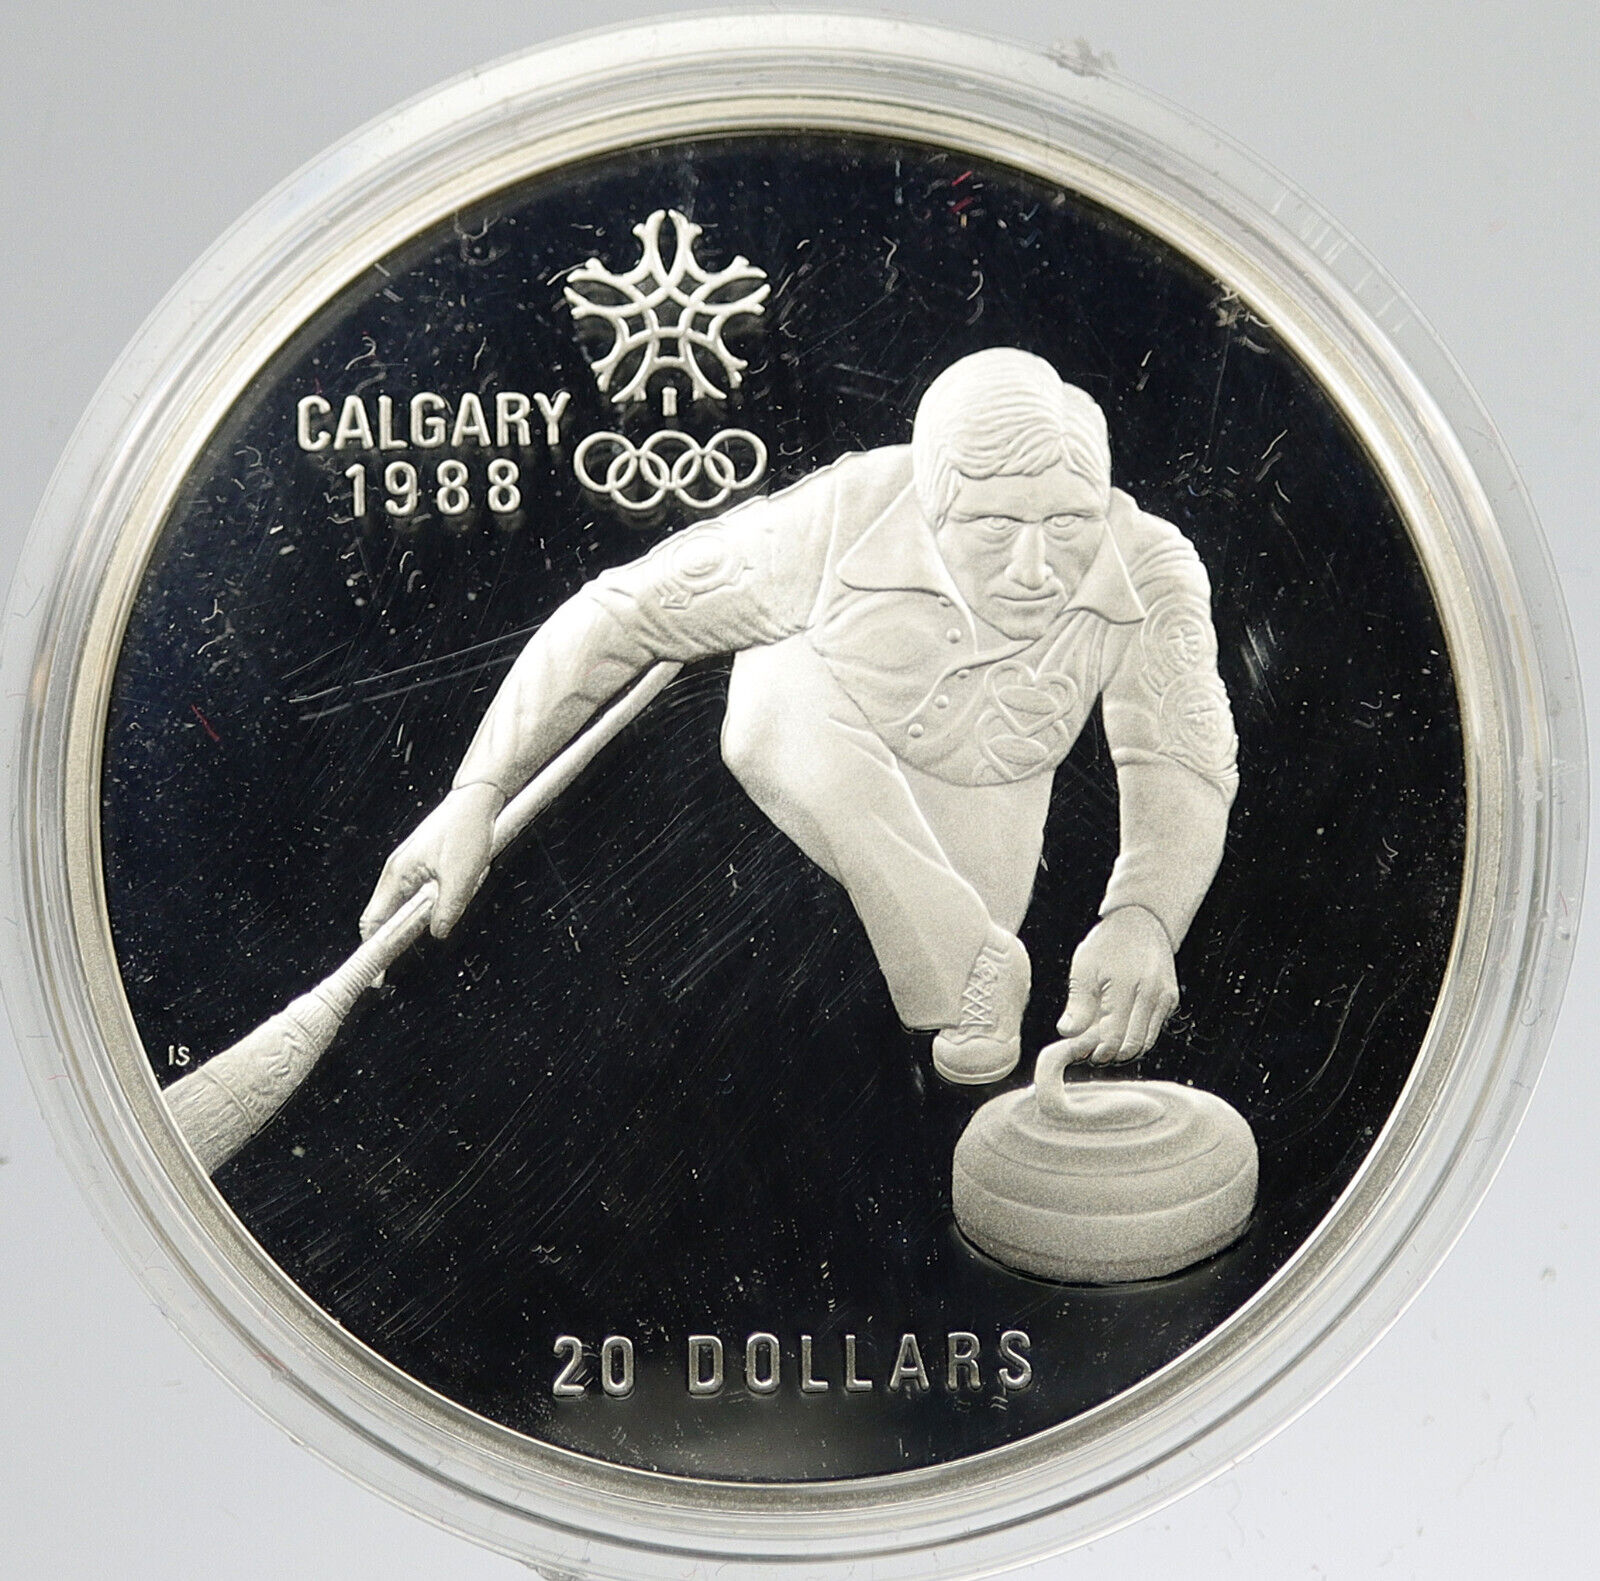 1987 CANADA 1988 CALGARY OLYMPICS Ice Curling Proof 1oz Silver $20 Coin i119722